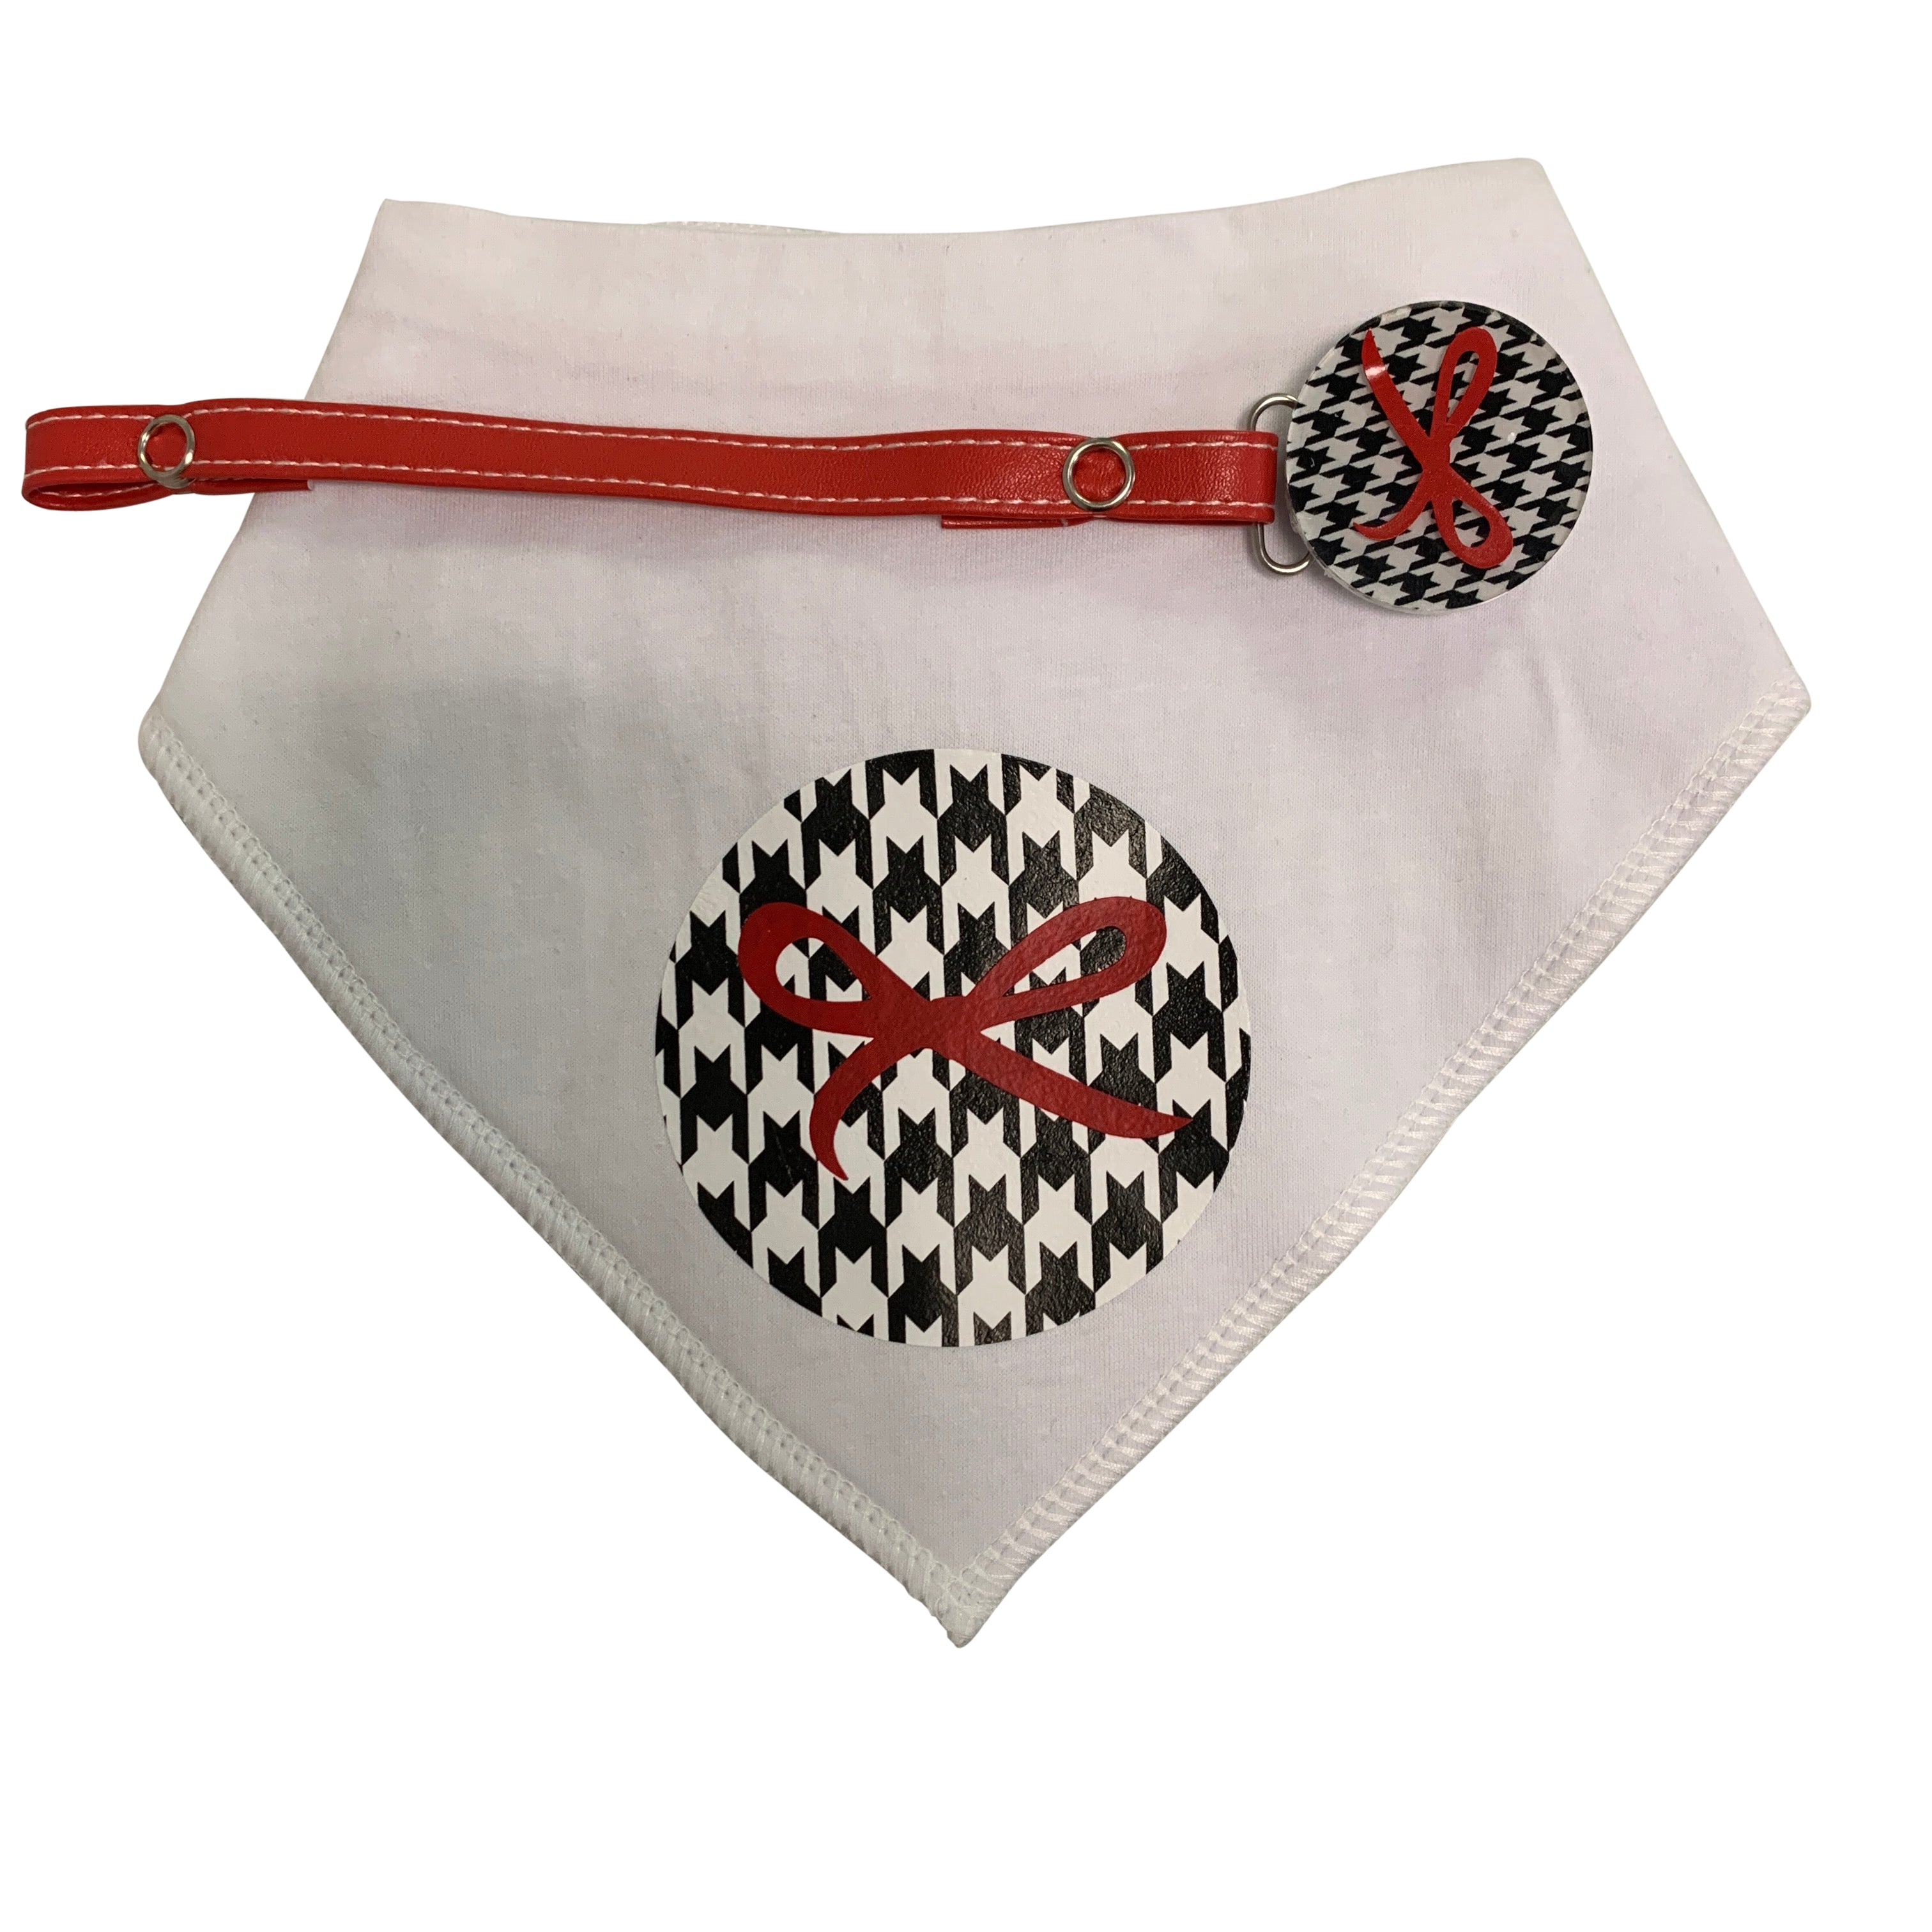 Houndstooth black, white with red bow bib and clip GIFT SET